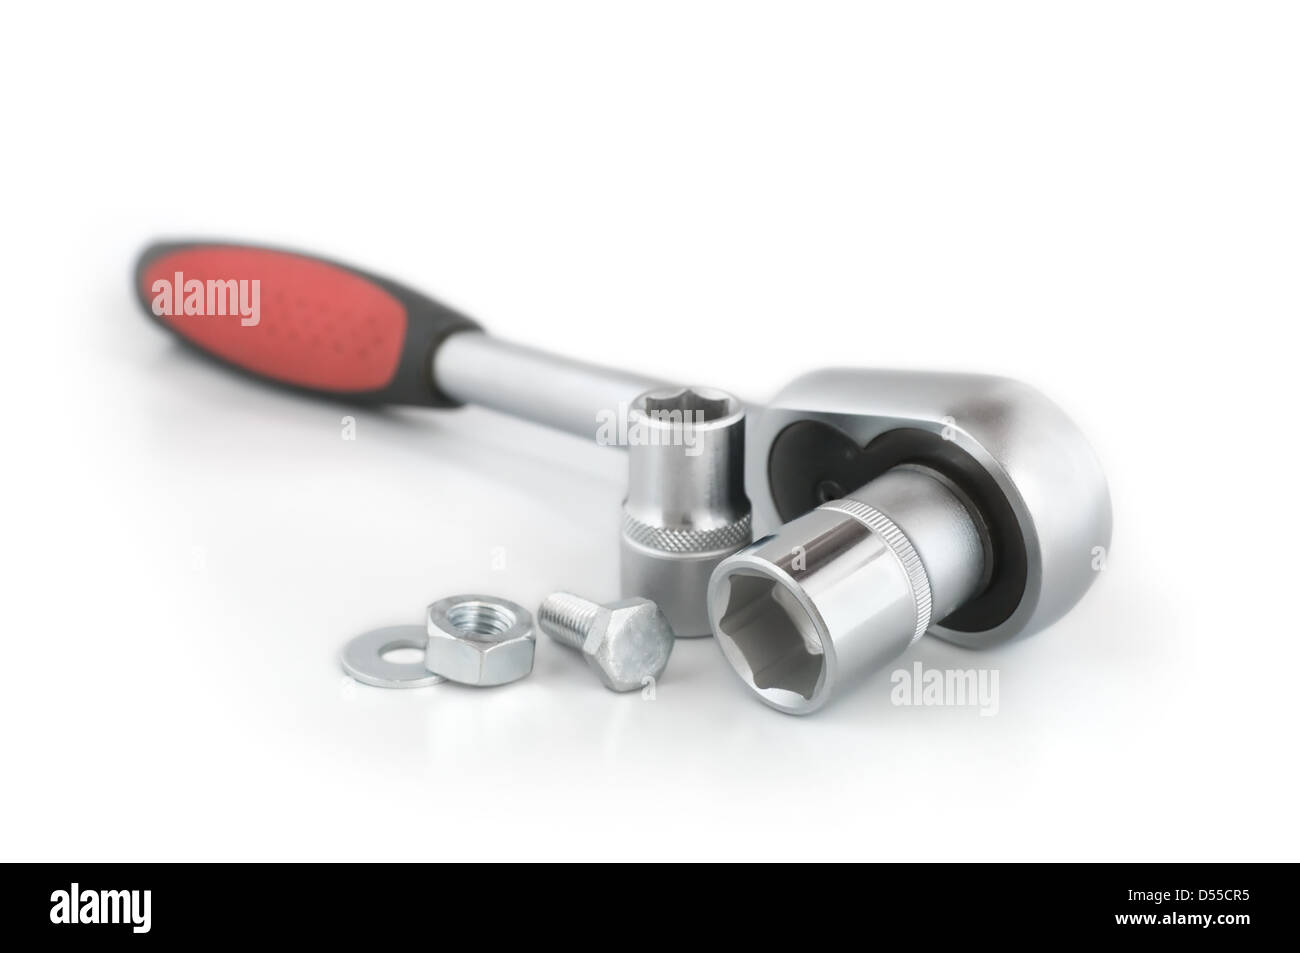 Socket spanner is photographed on the white background Stock Photo